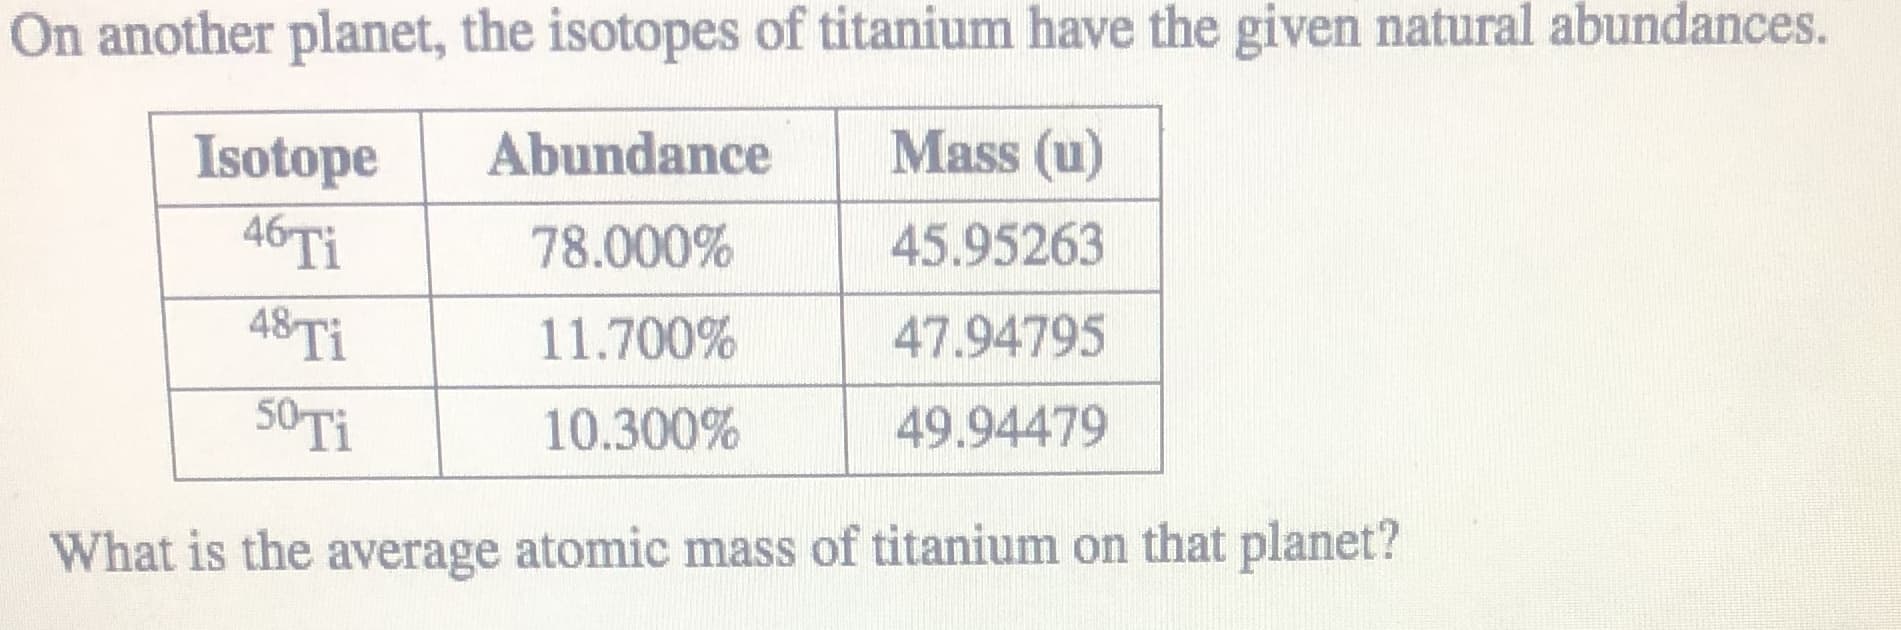 On another planet, the isotopes of titanium have the given natural abundances.
Abundance
Mass (u)
Isotope
46Ti
78.000%
45.95263
48Ti
50TI
11.700%
47.94795
10.300%
49.94479
What is the average atomic mass of titanium on that planet?
